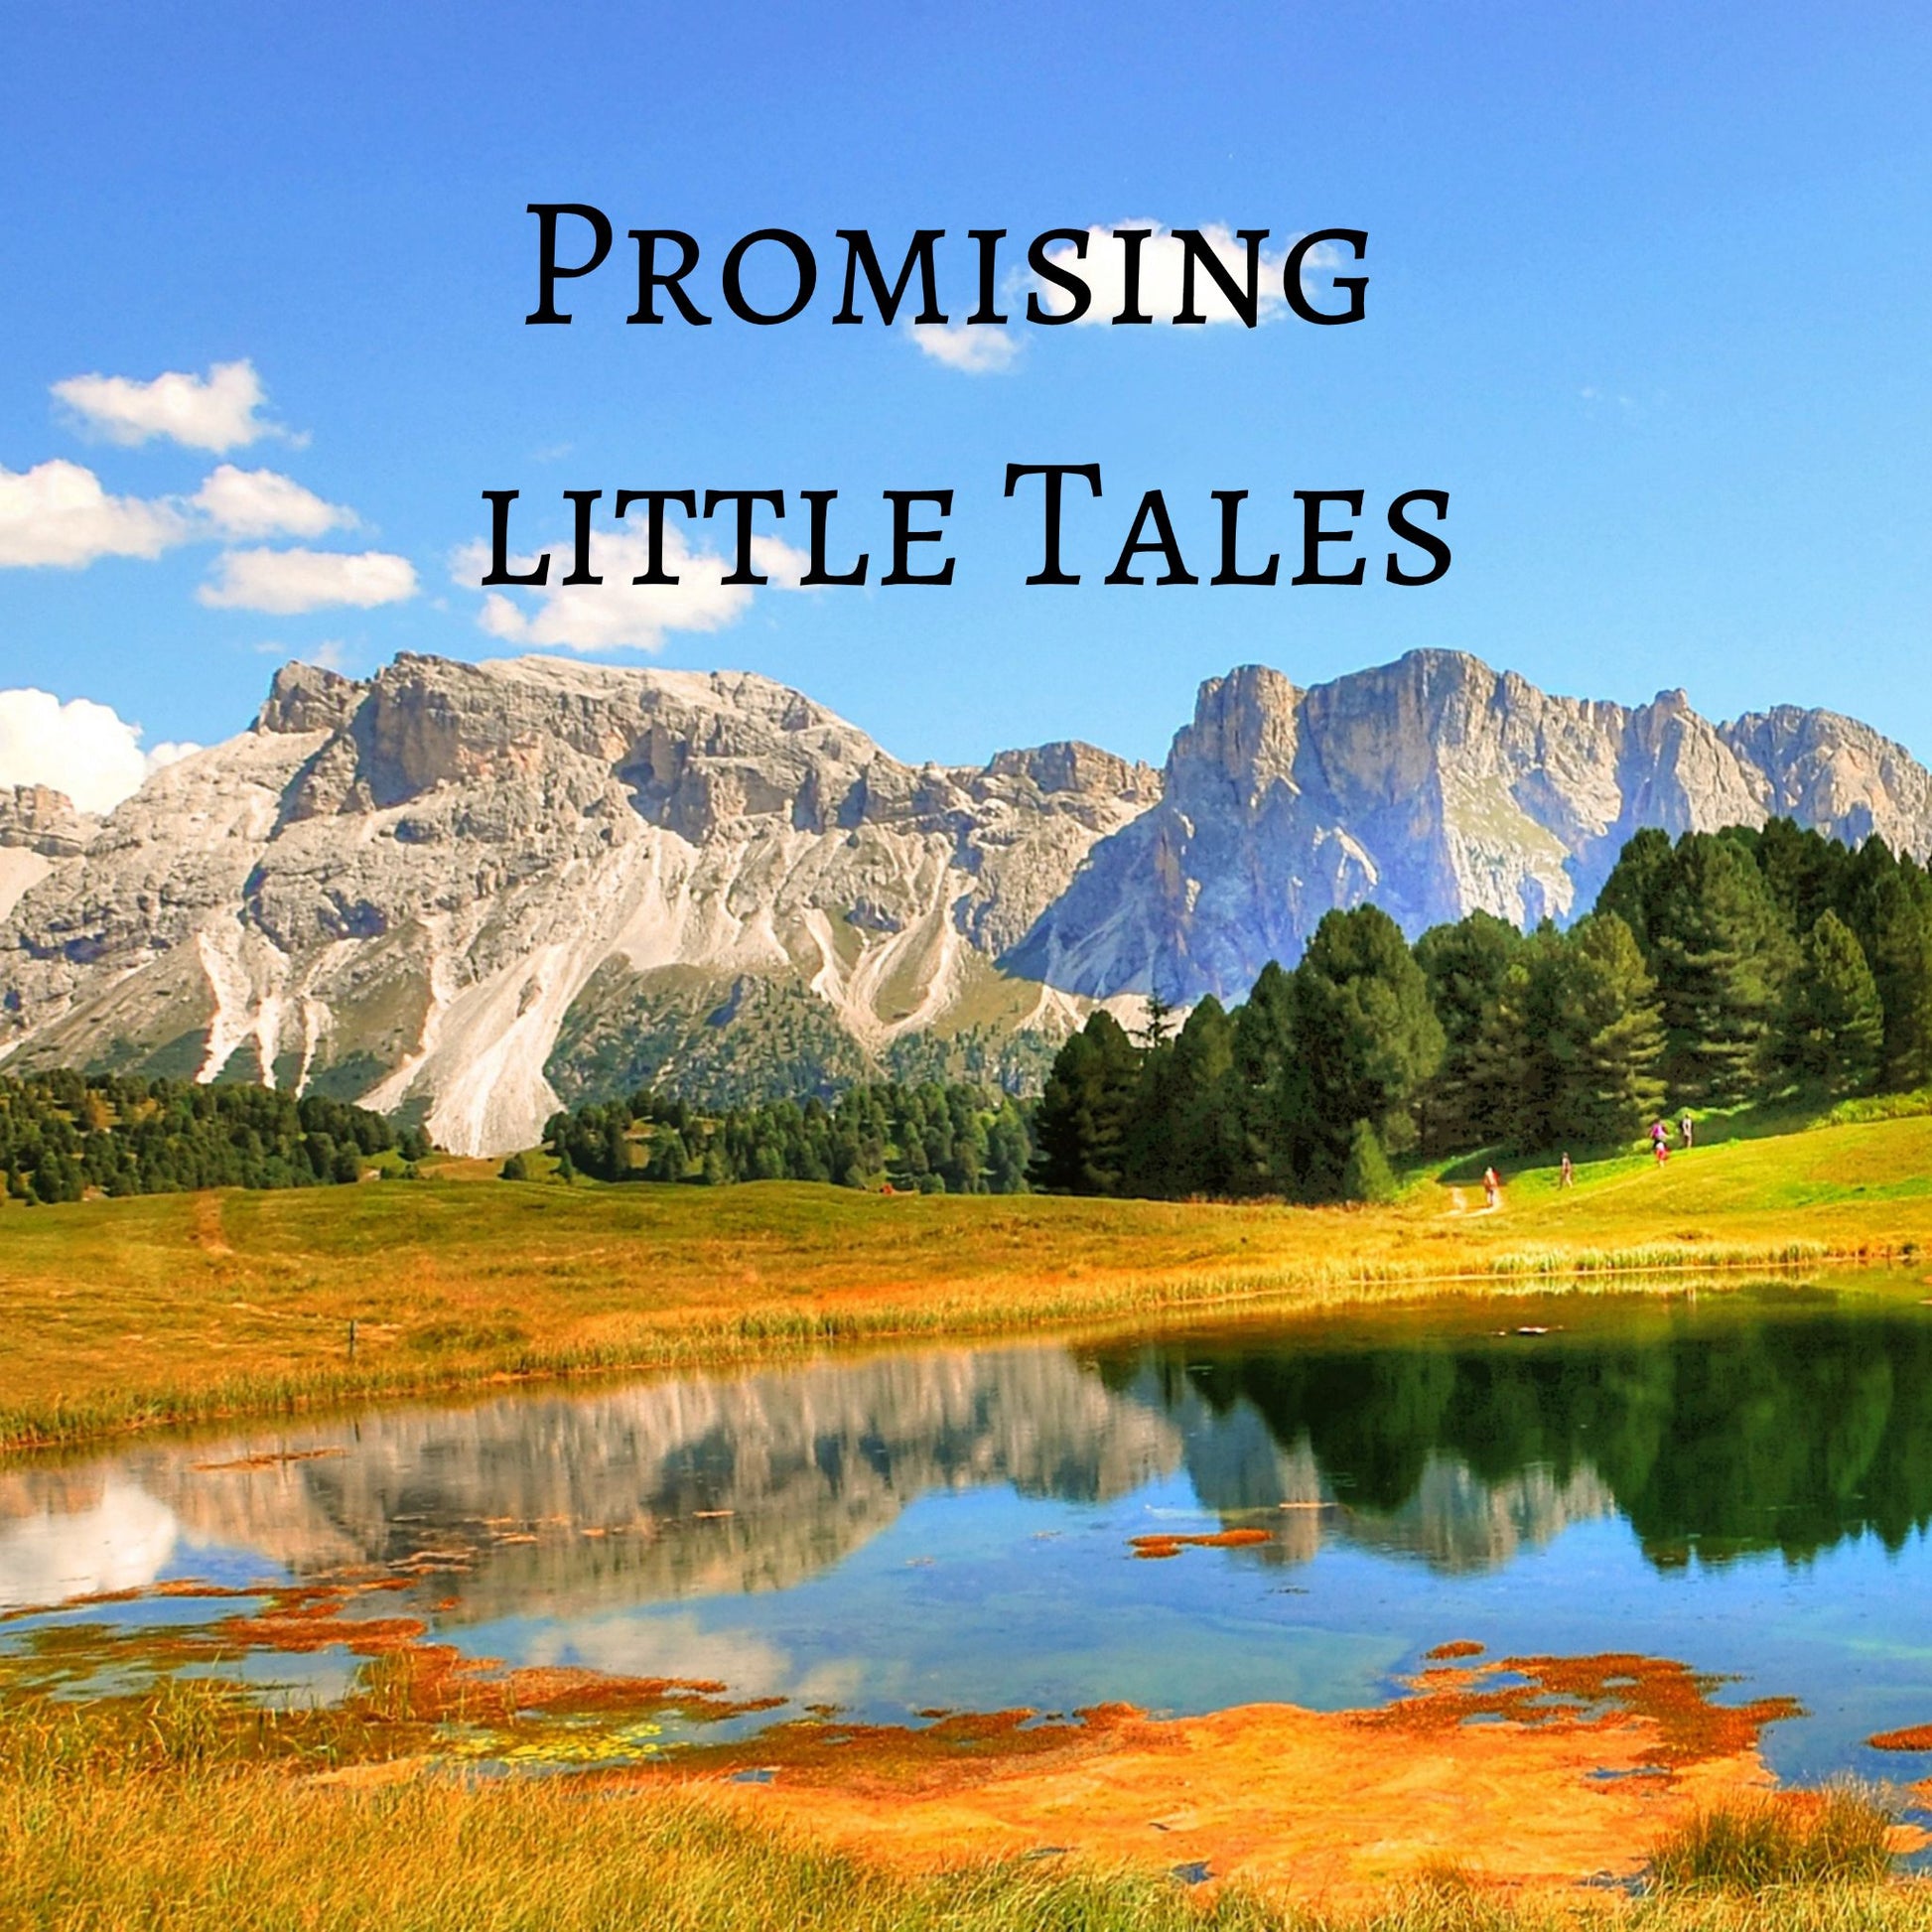 CD Cover of song Promising Little Tales